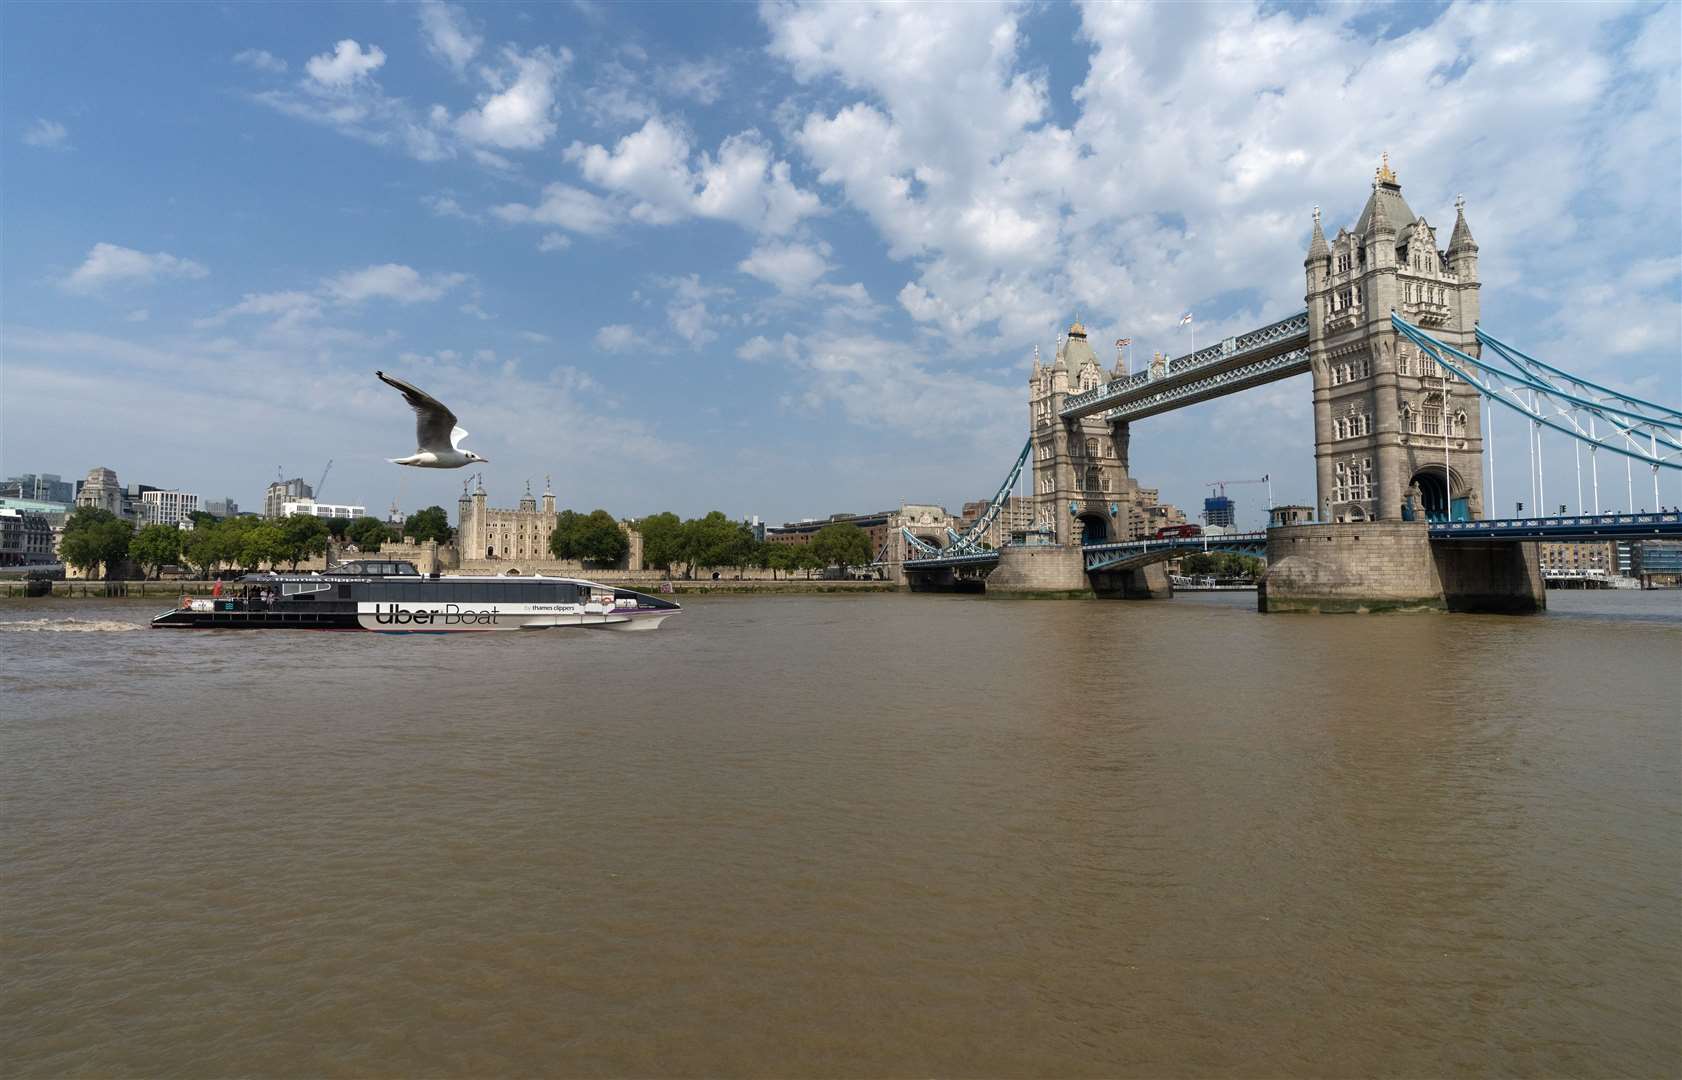 Uber Boats will run a summer special service from Gravesend to Greenwich and London